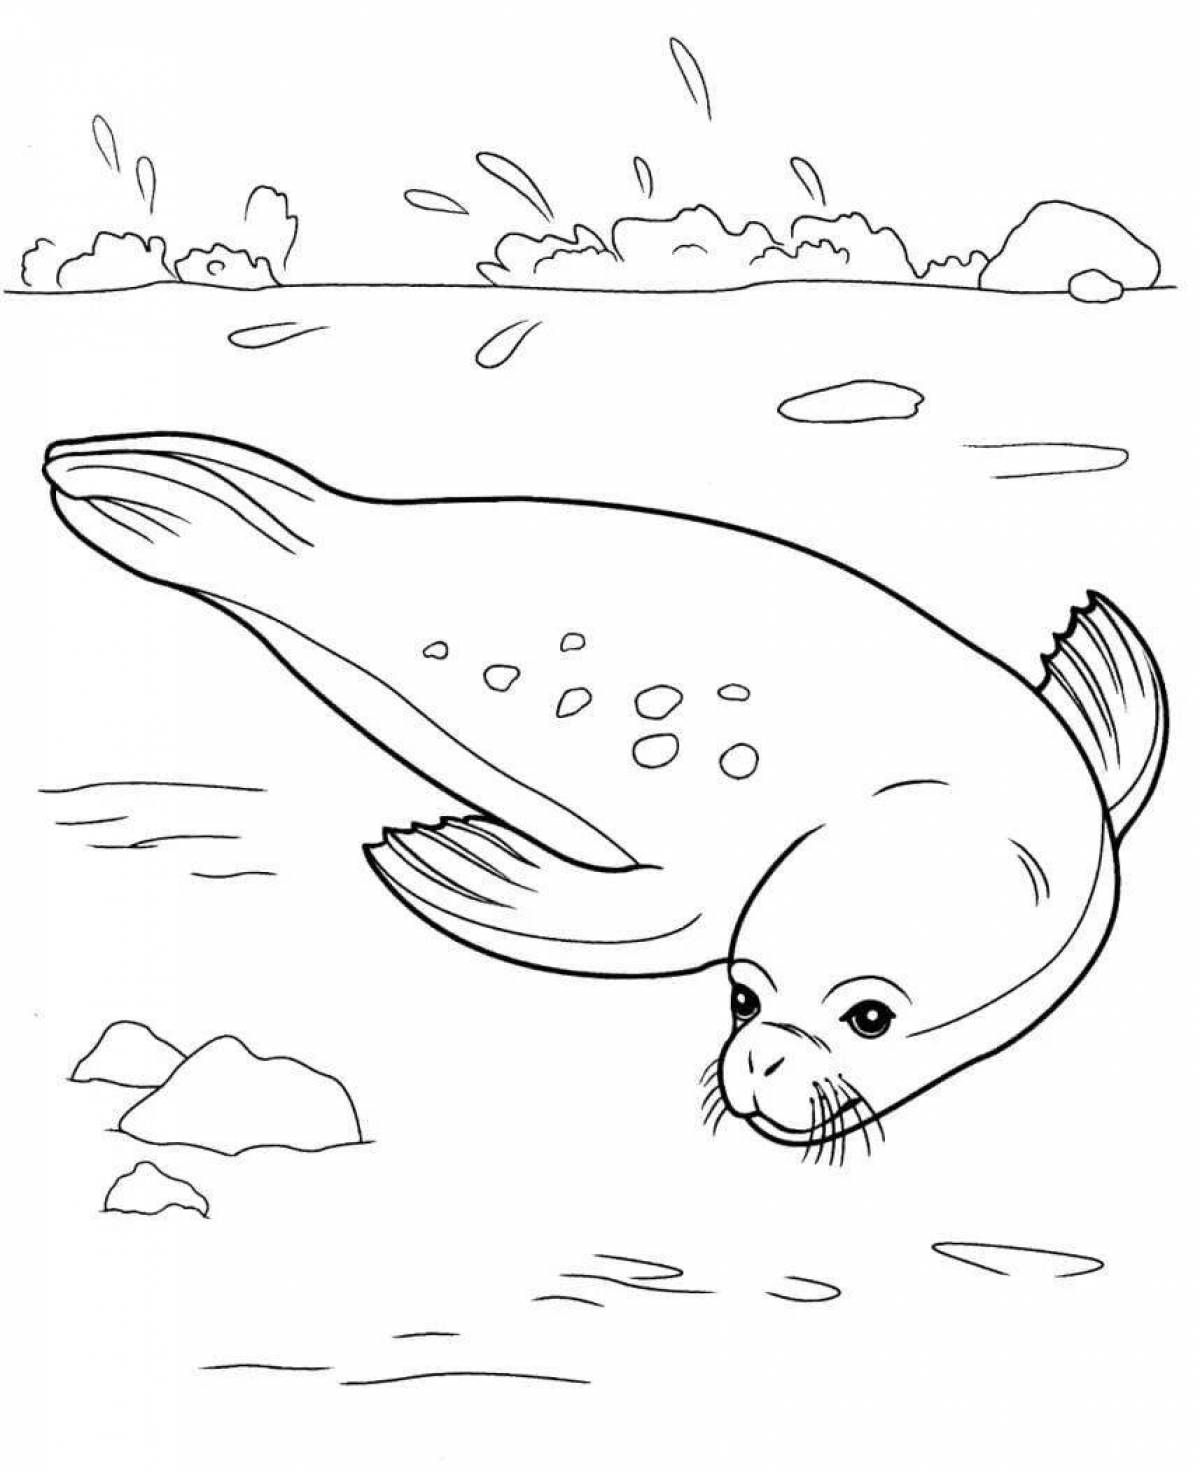 Funny northern animals coloring pages for kids